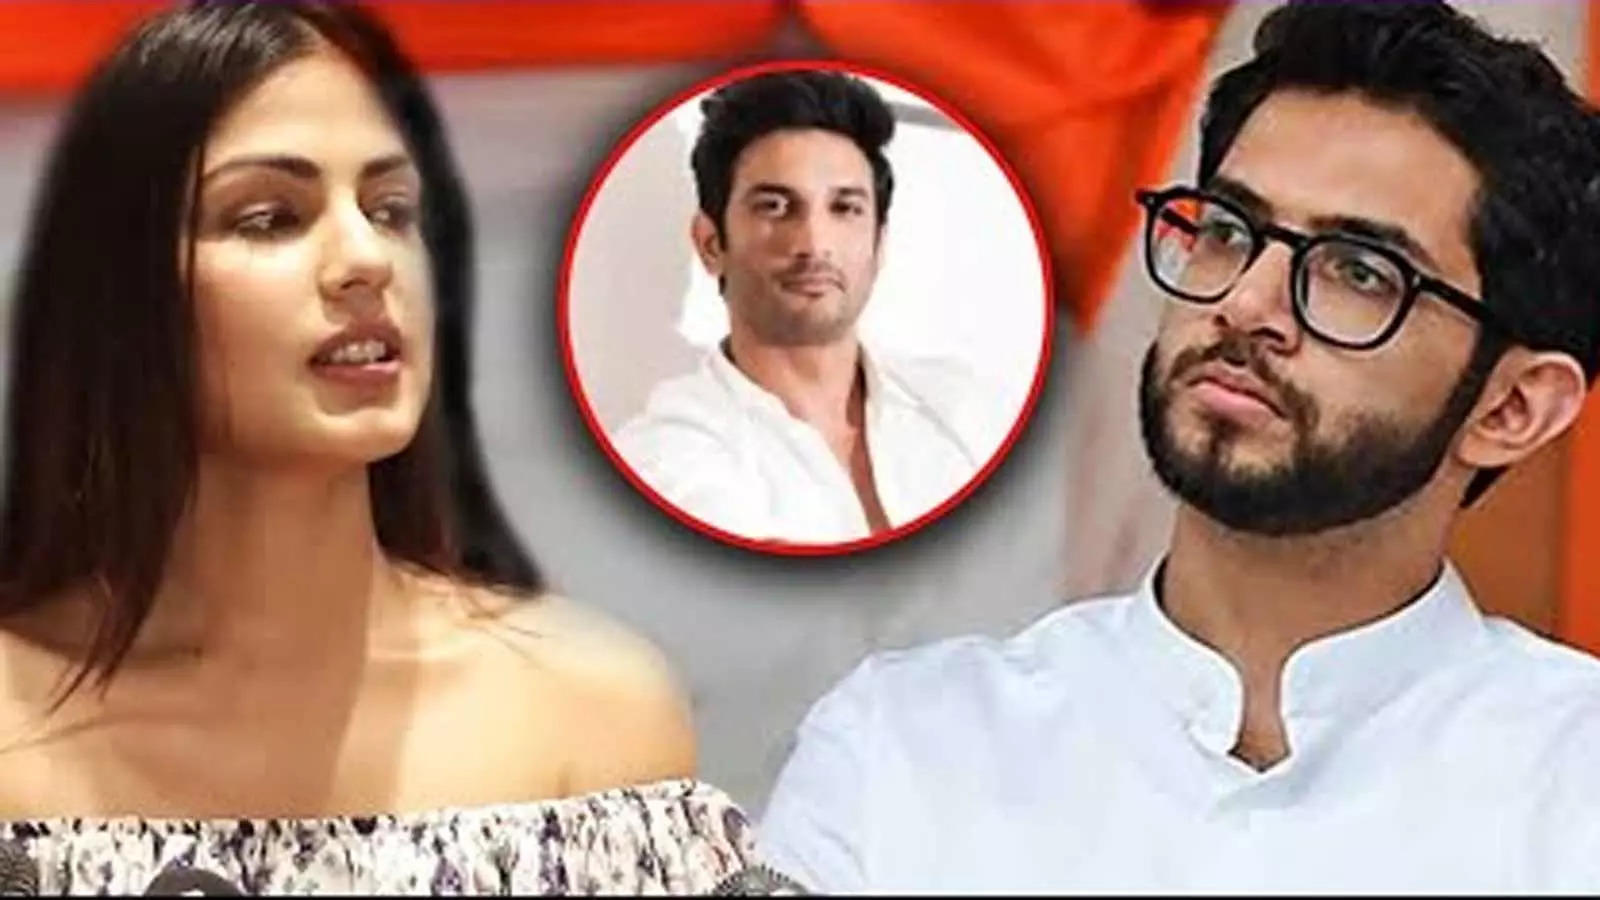 New twist in Sushant Singh Rajput's case: Aditya Thackeray's alleged phone calls to Rhea Chakraborty after actor's death raises political storm | Hindi Movie News - Bollywood - Times of India